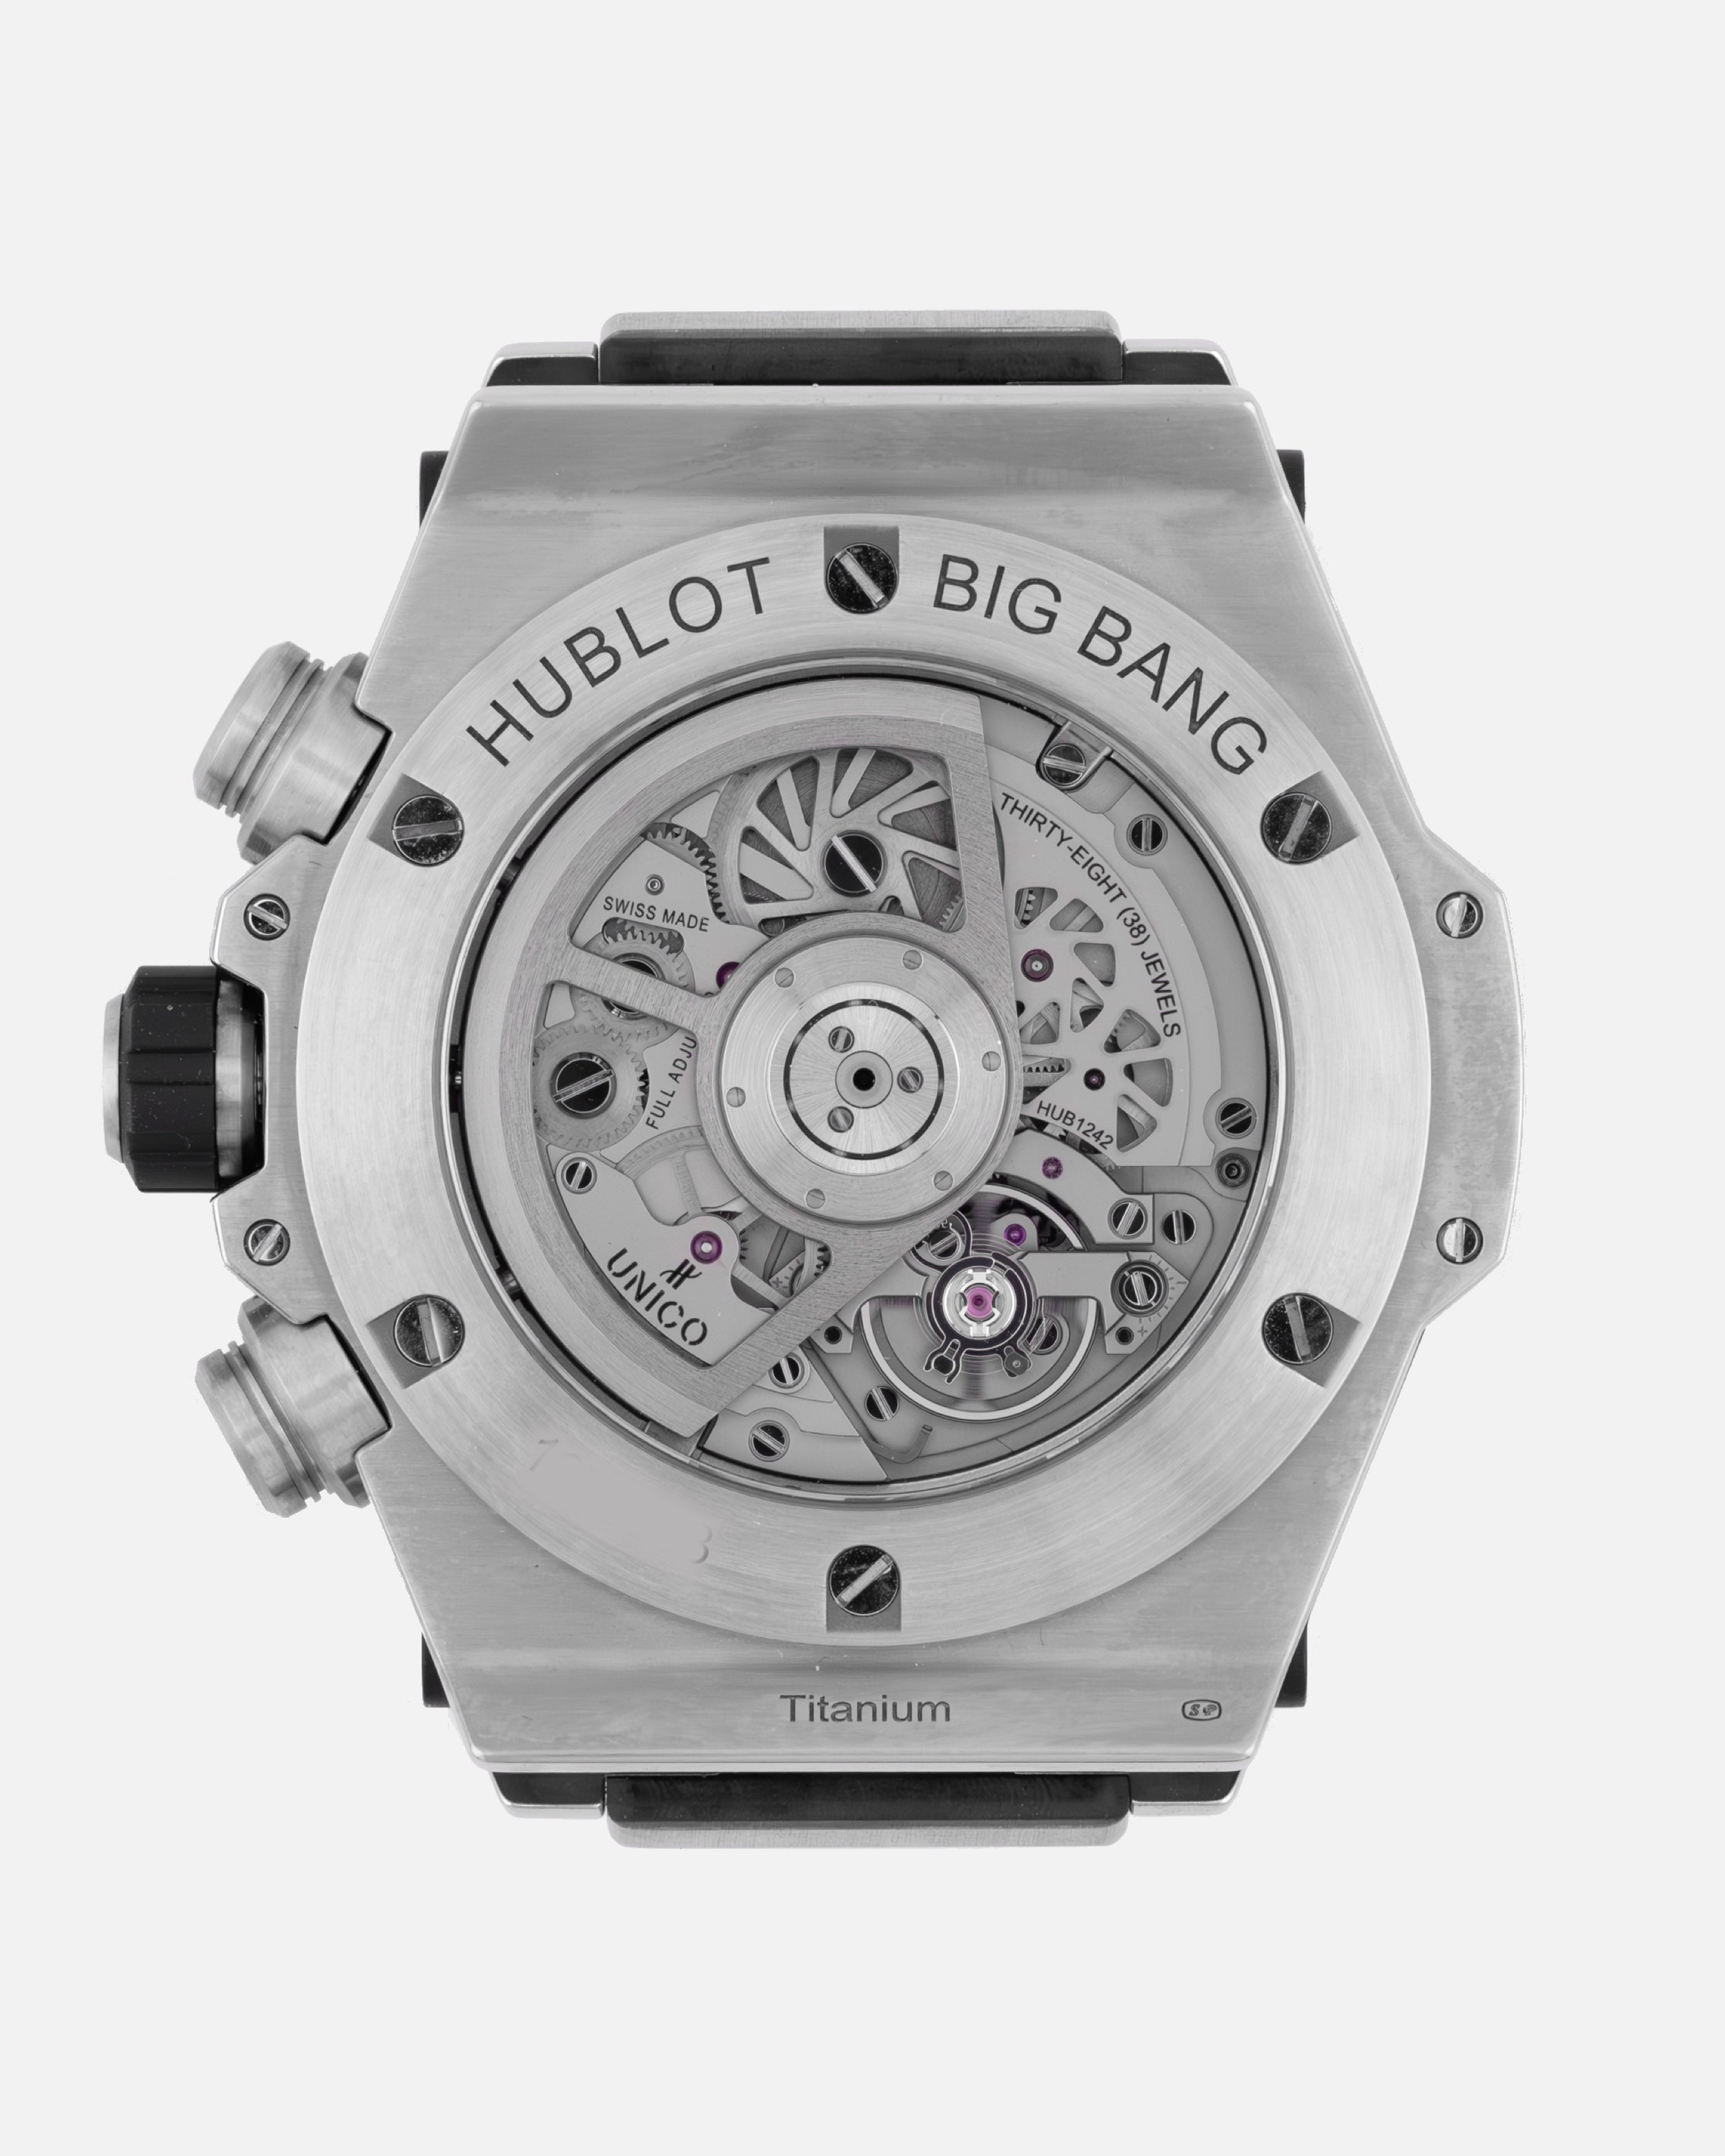 Hublot Bing Bang Watches For Sale - Jewels In Time